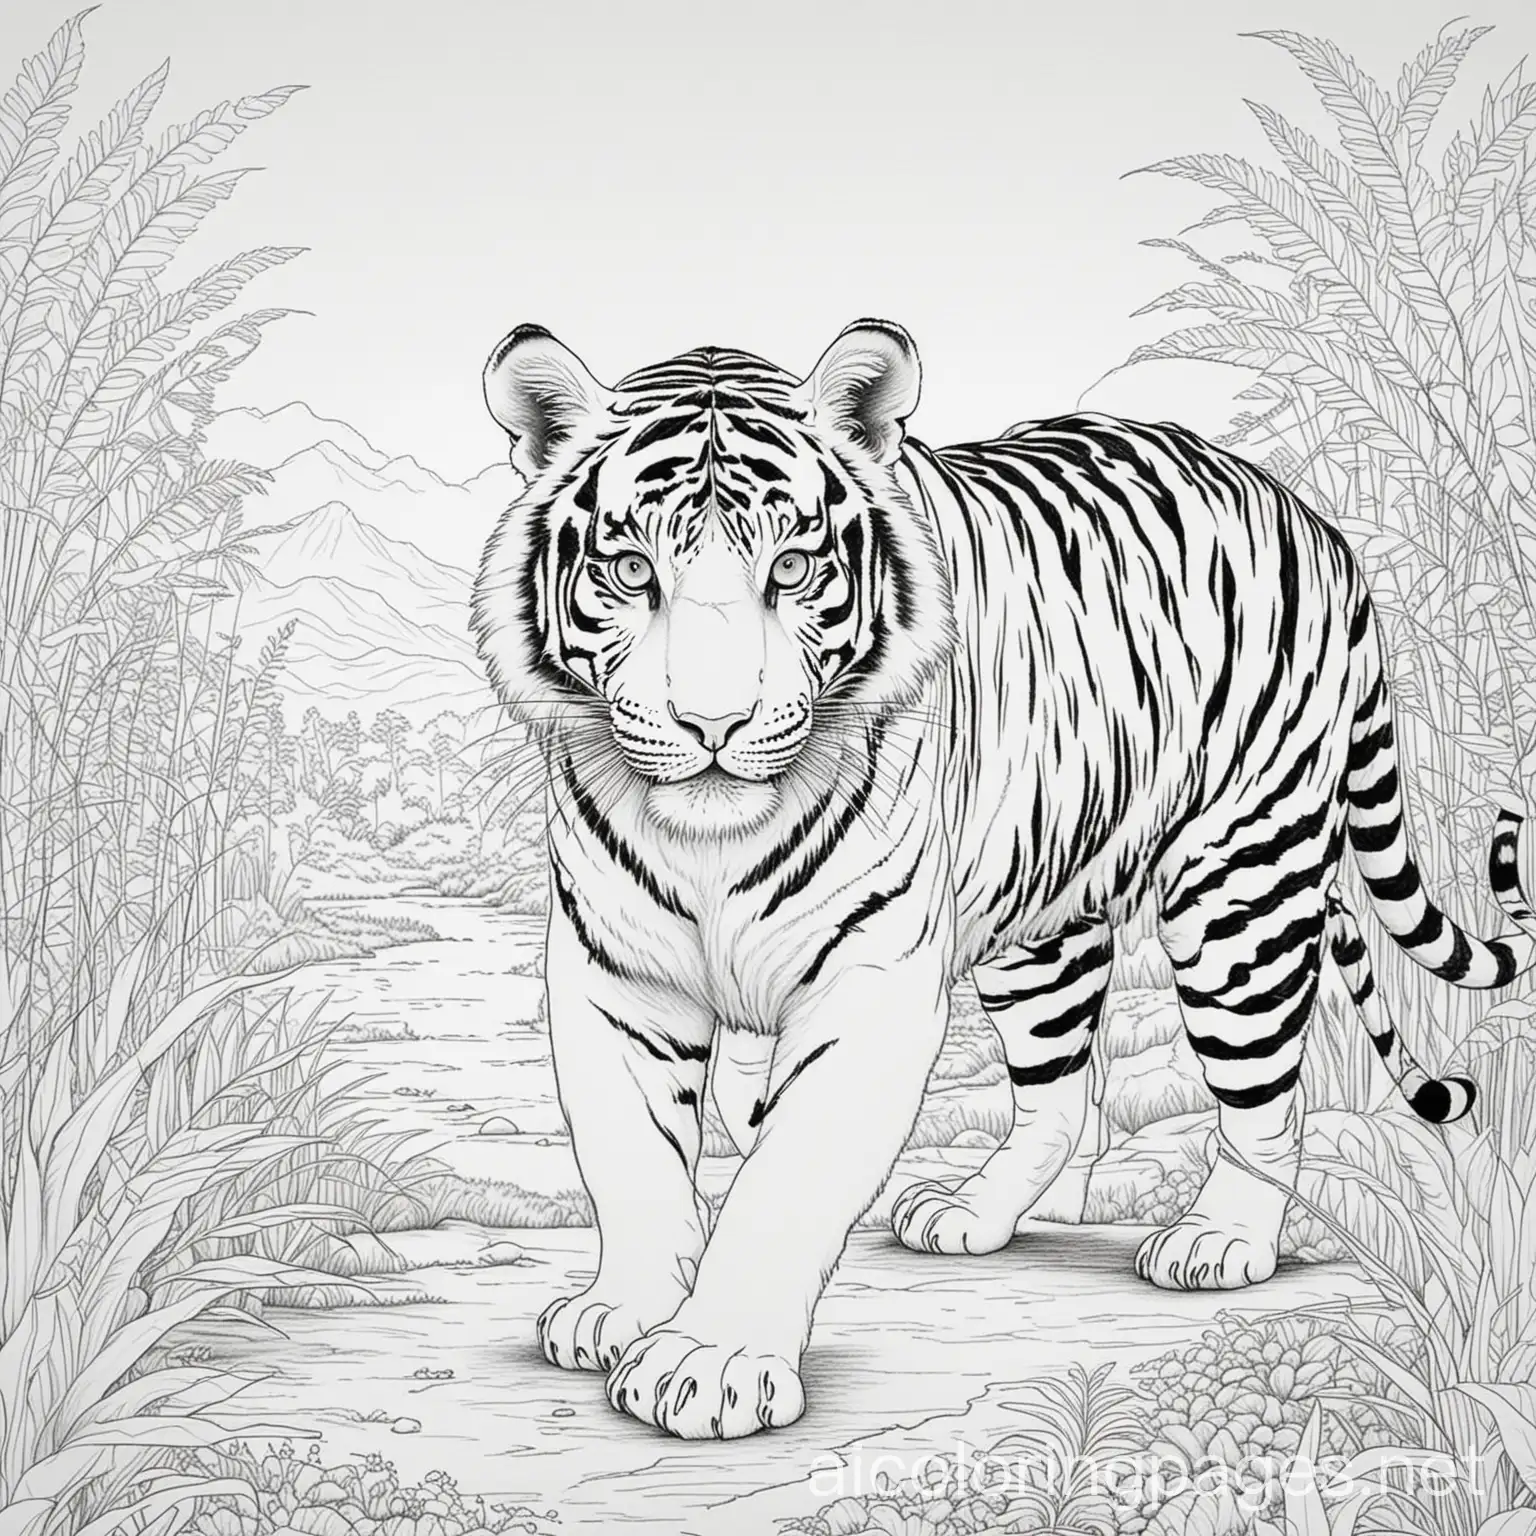 tiger in savana
for coloring page, Coloring Page, black and white, line art, white background, Simplicity, Ample White Space. The background of the coloring page is plain white to make it easy for young children to color within the lines. The outlines of all the subjects are easy to distinguish, making it simple for kids to color without too much difficulty